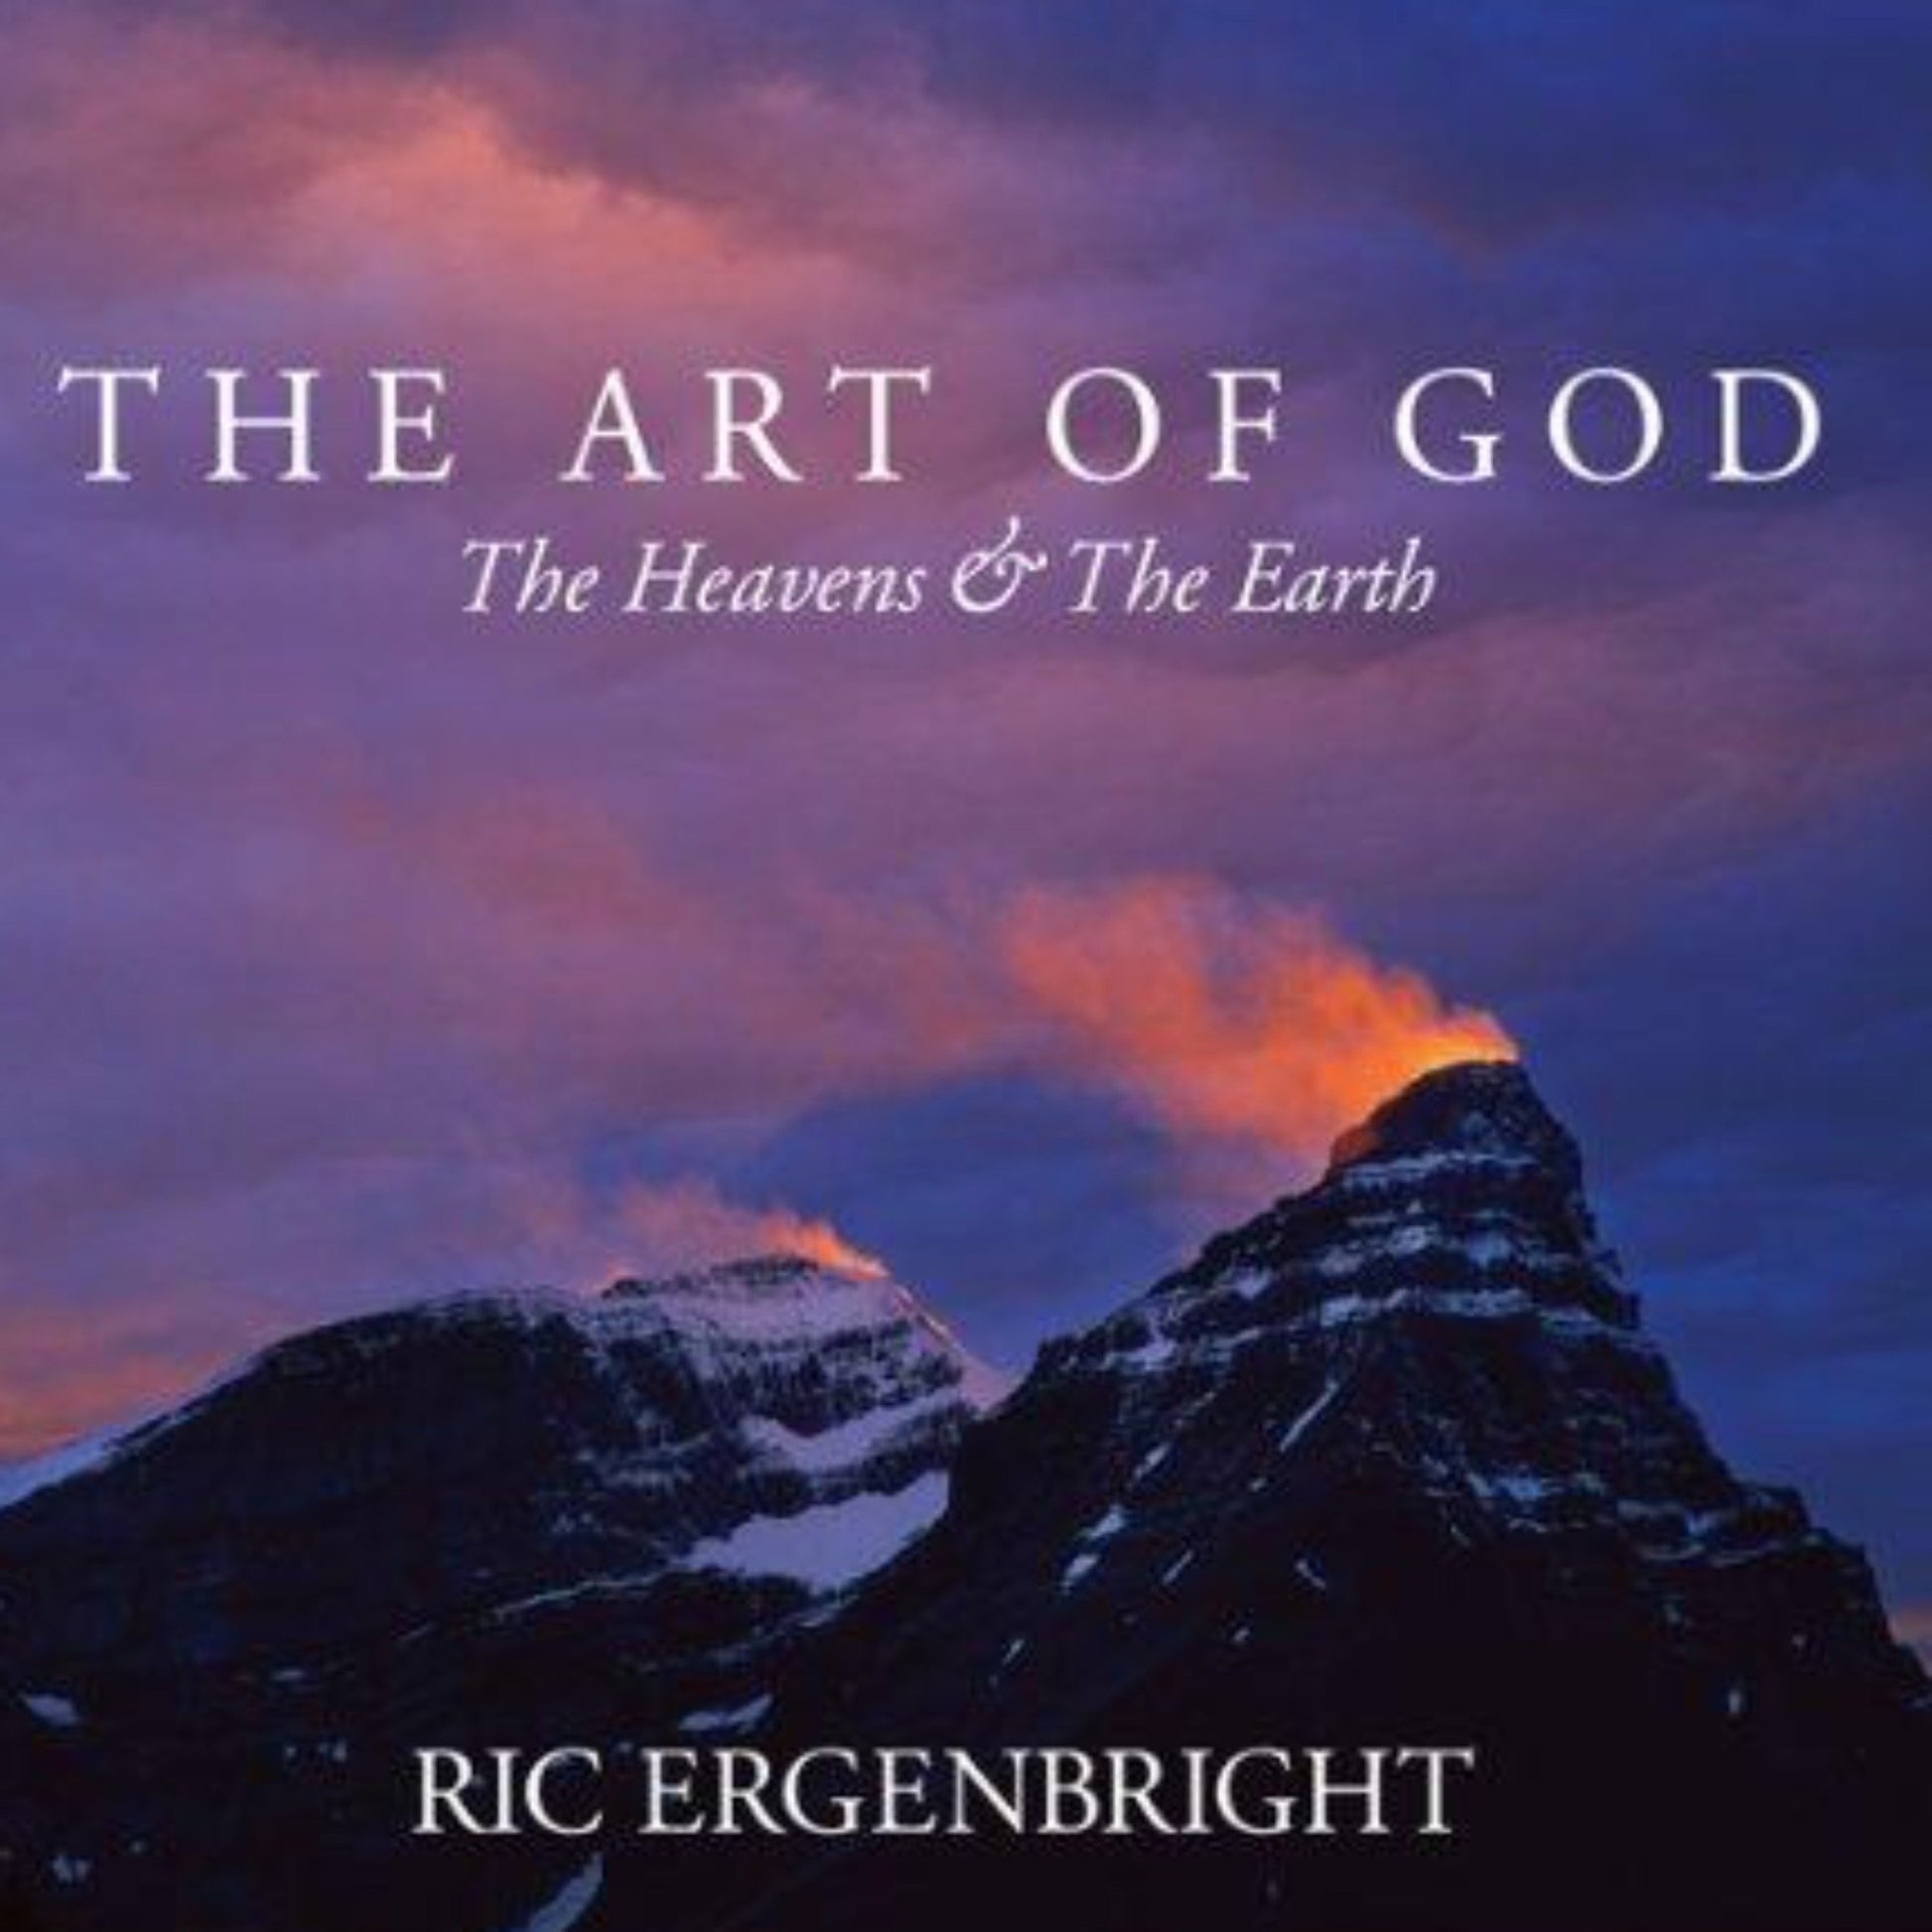 The Art of God Ric Ergenbright